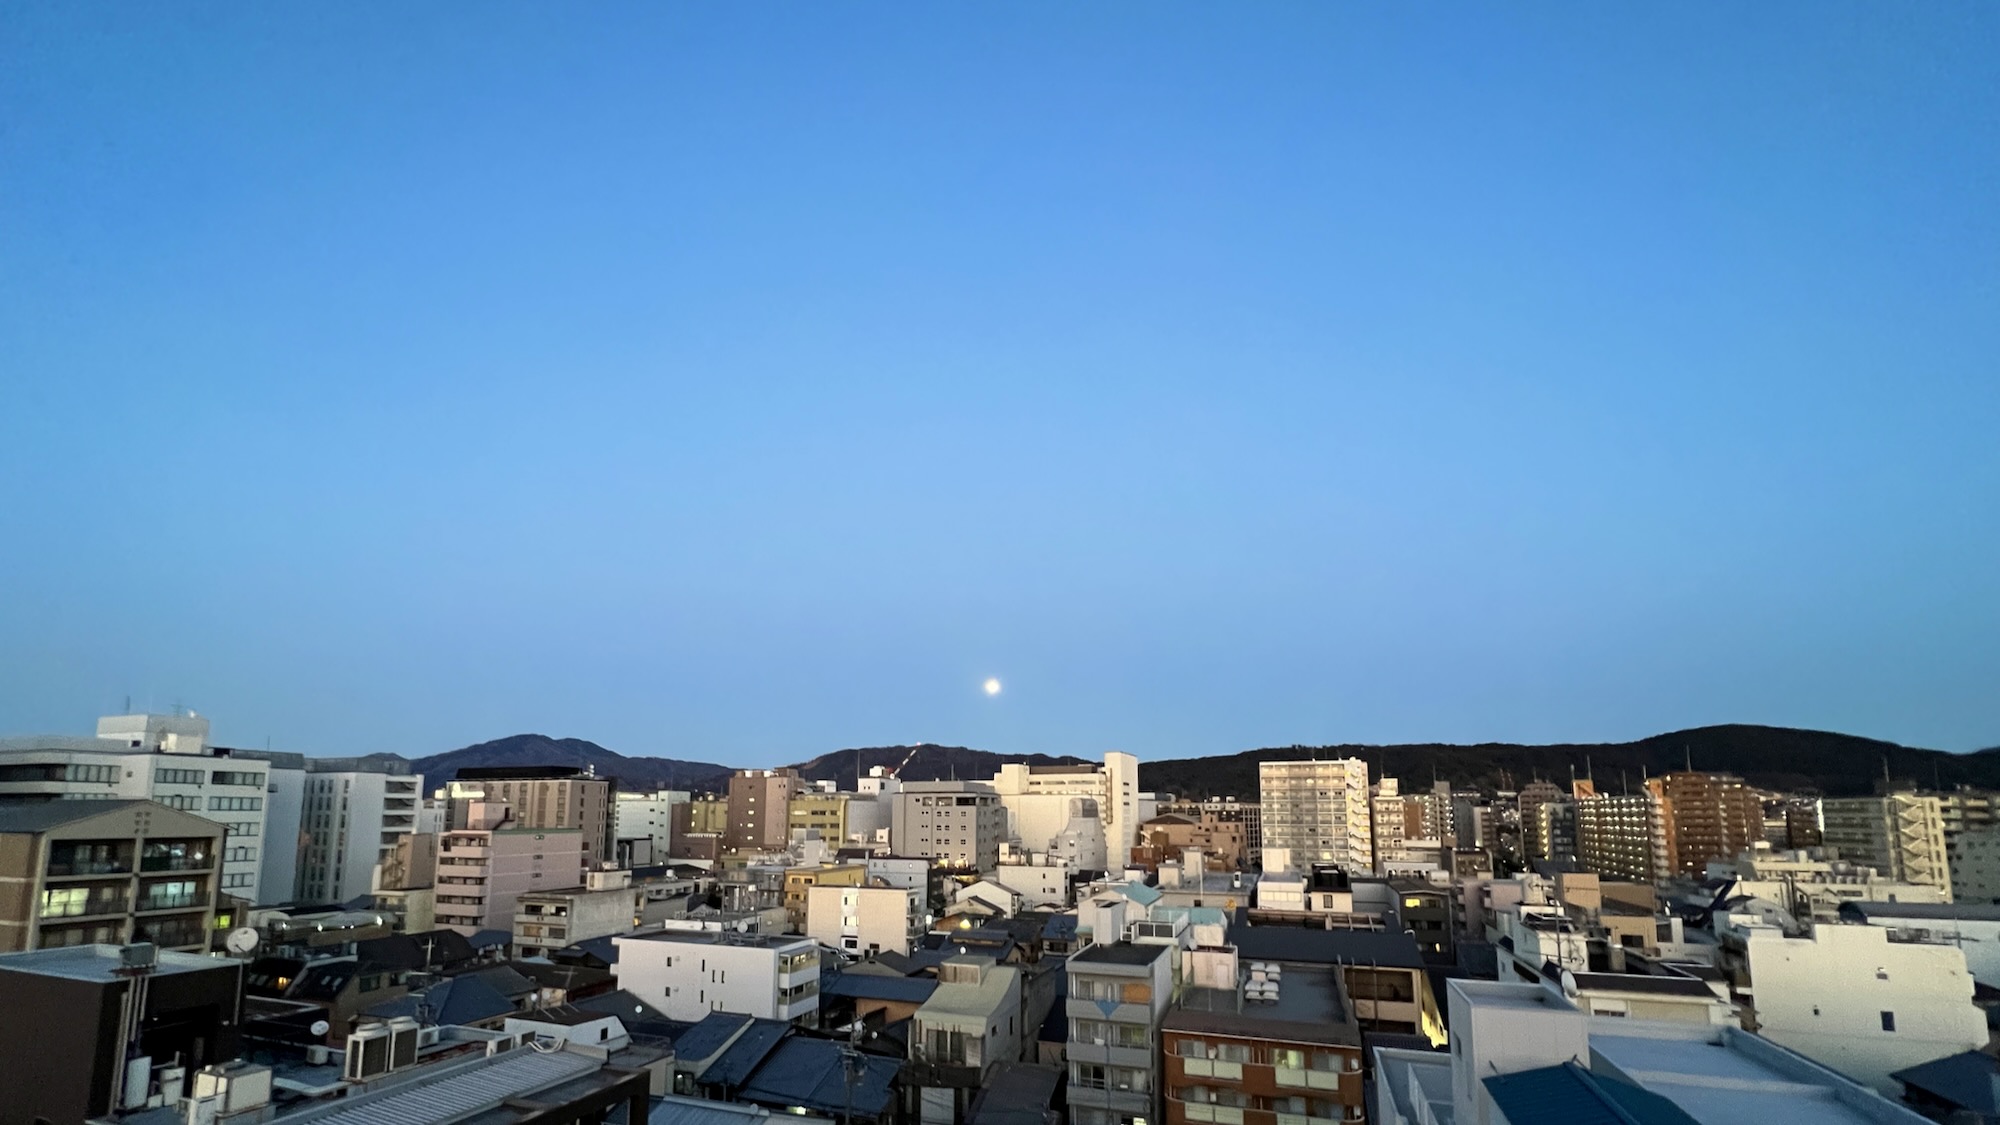 Full moon low over the horizon during a blue twilight sky. Just below are the eastern mountains of Kyoto, and many buildings